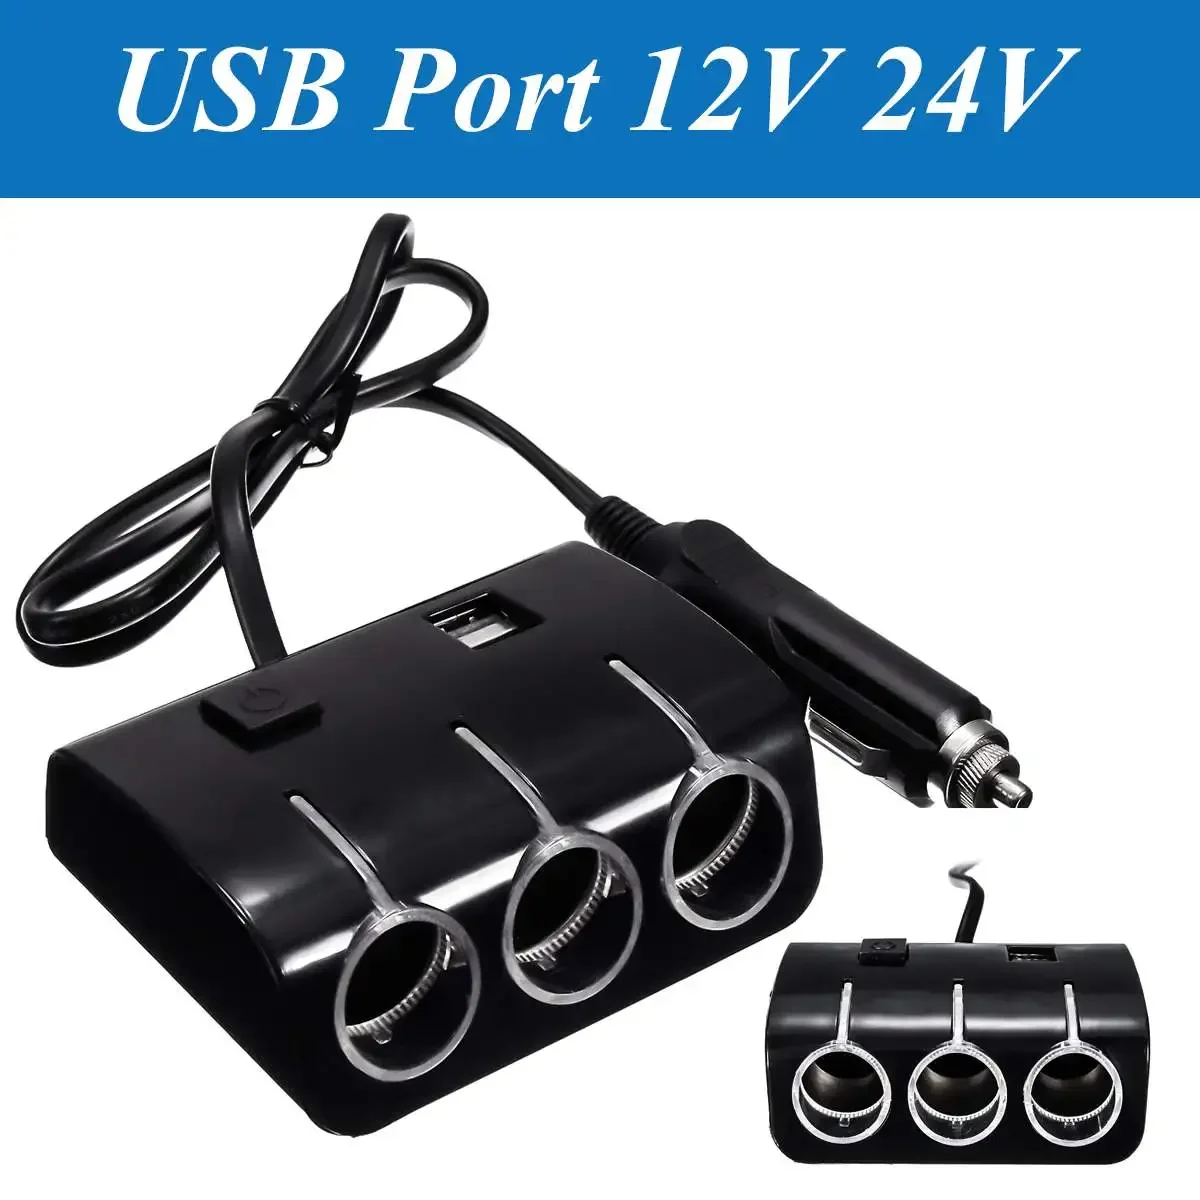 

3 Sockets 120W Car Autos Cigarette Lighter Splitter 2 Usb Ports Charger Adapter With Switch Car Accessory 12V 24V